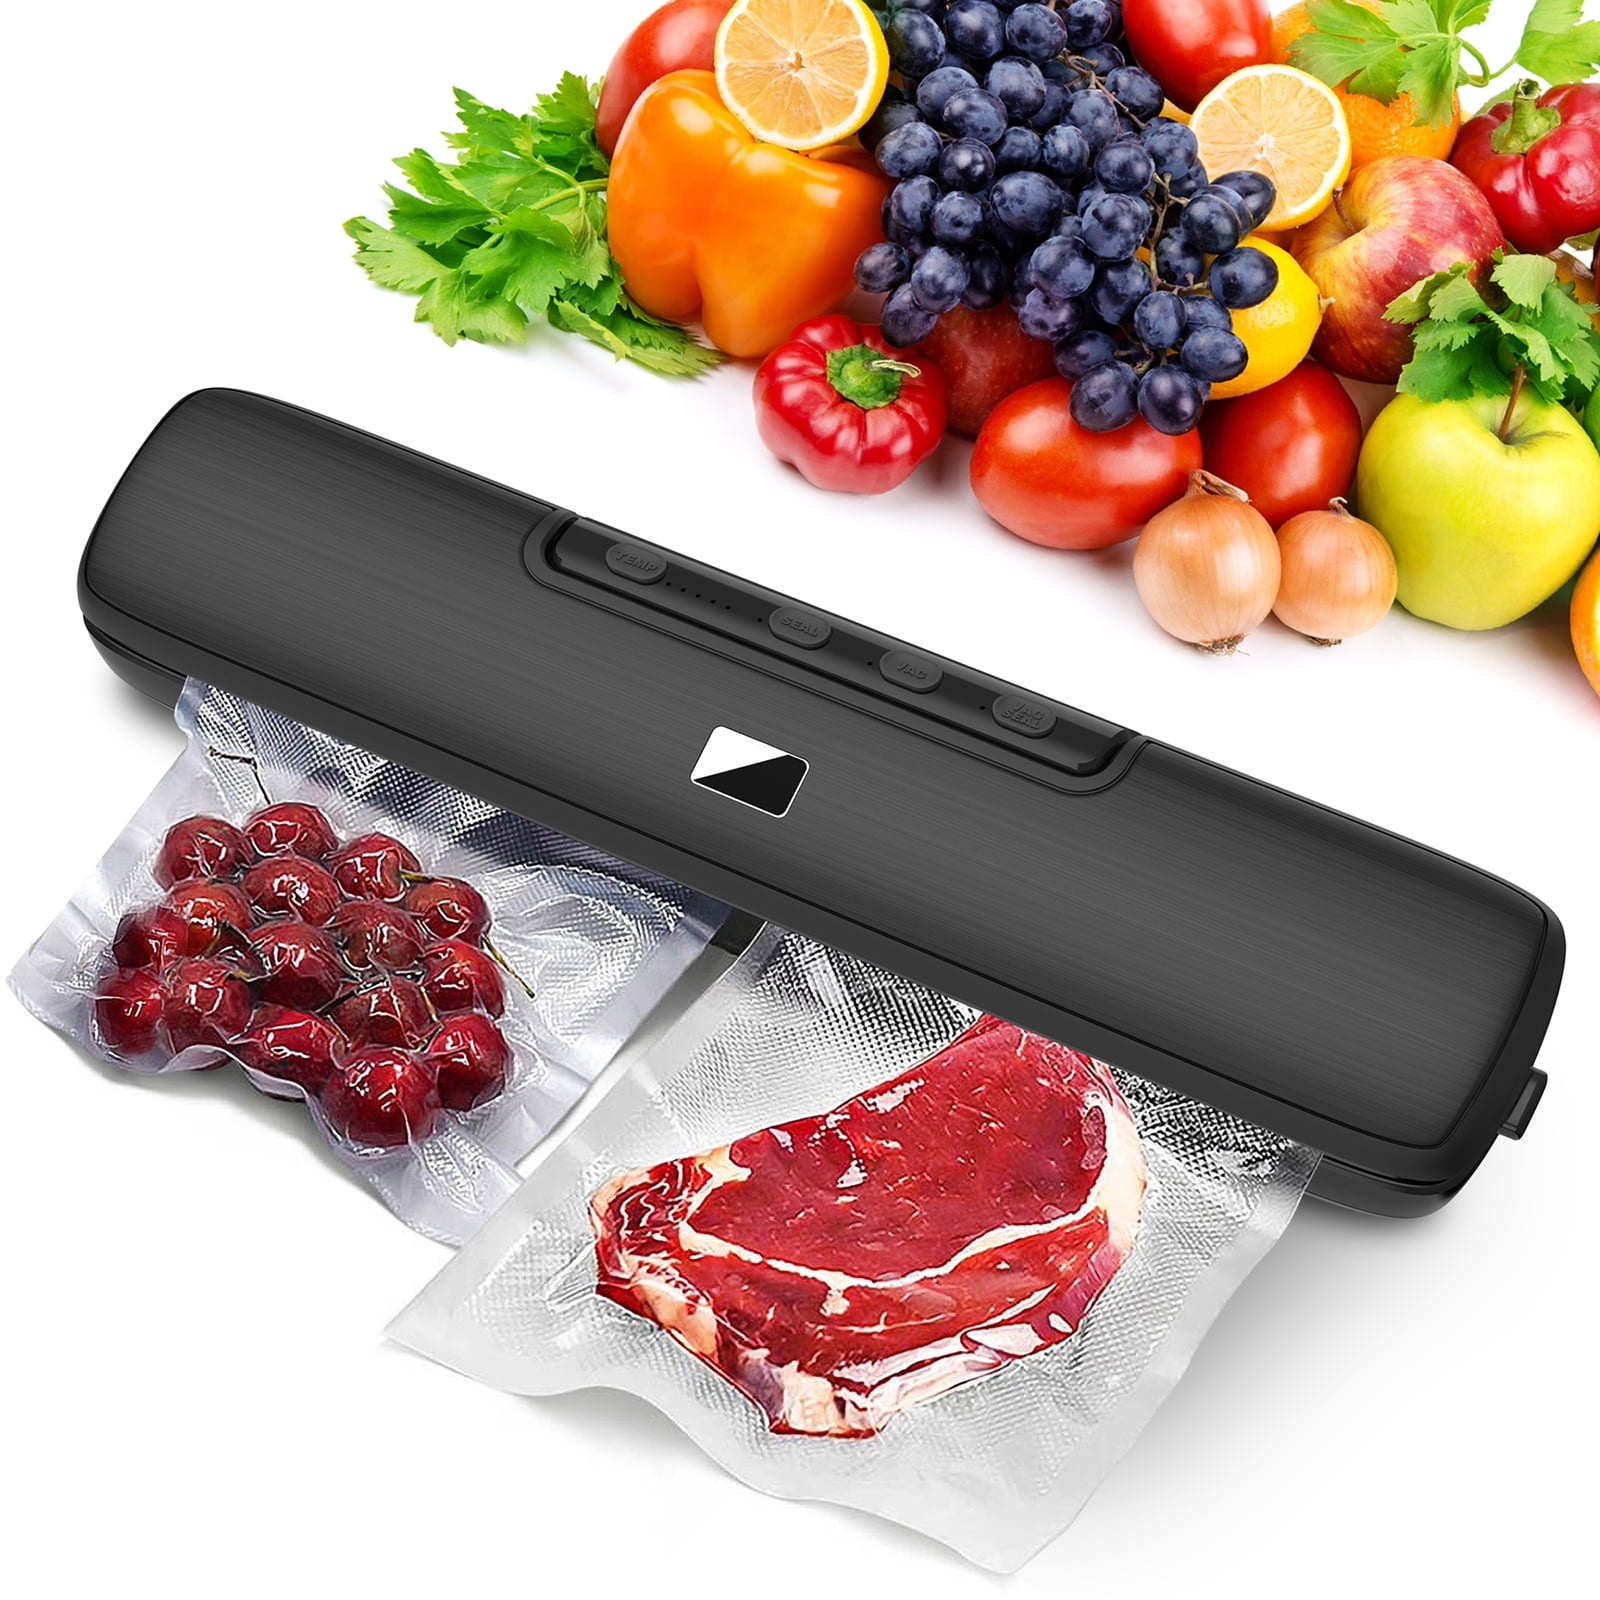 VAKUEN Vacuum Sealer, Automatic vacuum sealing operation, Ideal for keeping  food fresh and marinating everything from meat to veggies, Keep food fresh